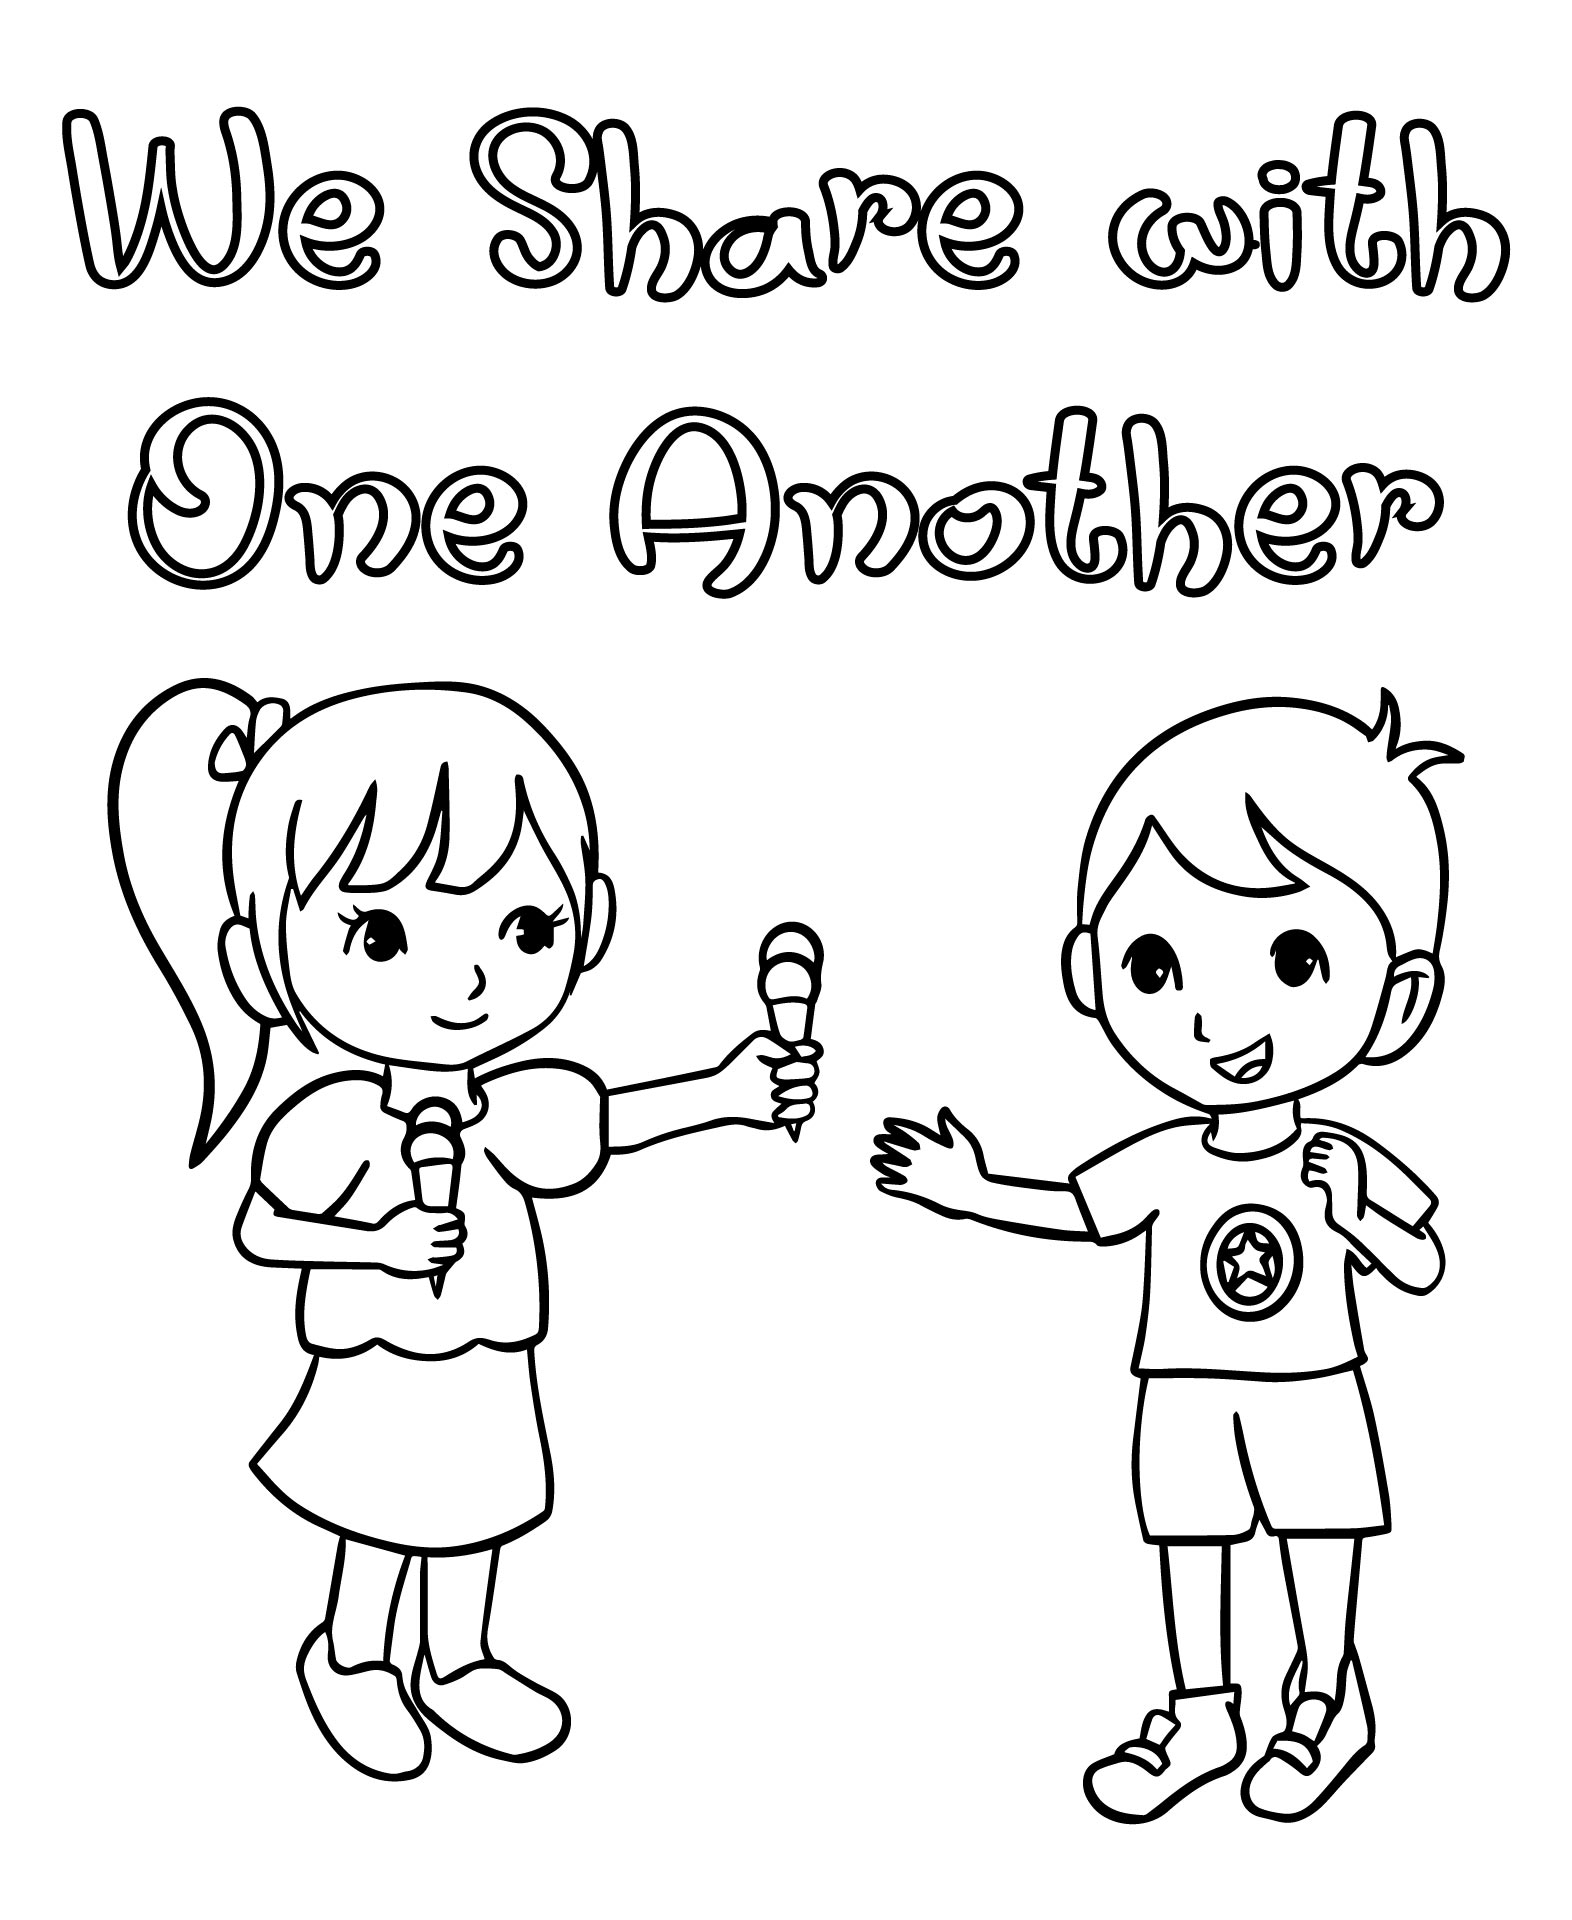 Classroom Rules & Expectations Printable Coloring Pages